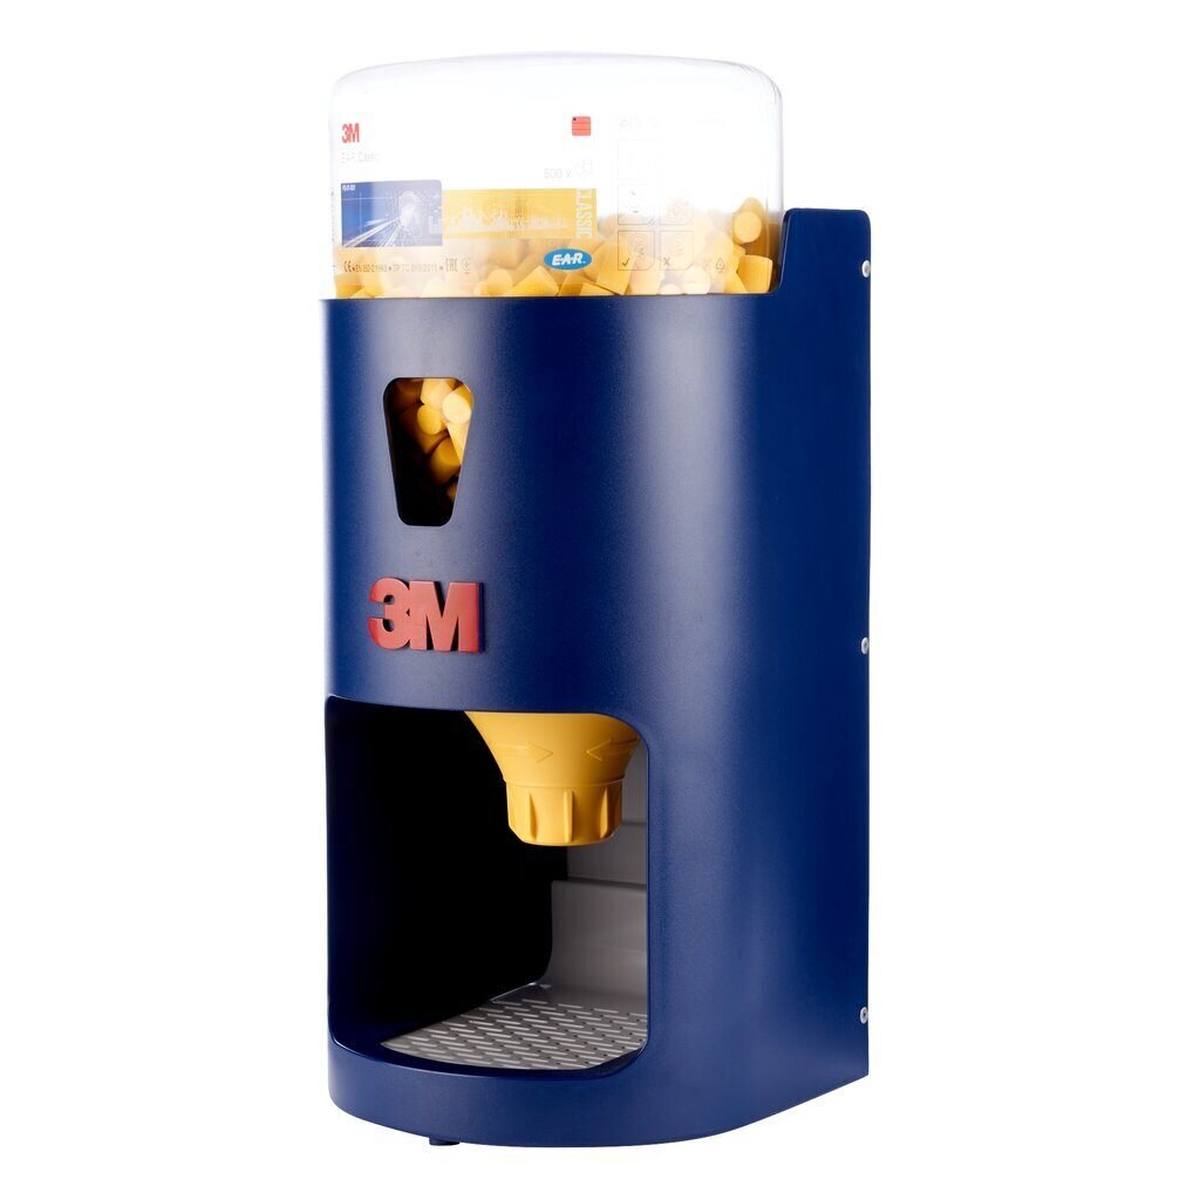 3M E-A-R One-Touch Pro Dispenser (without attachment), compatible with all refills #391-0000